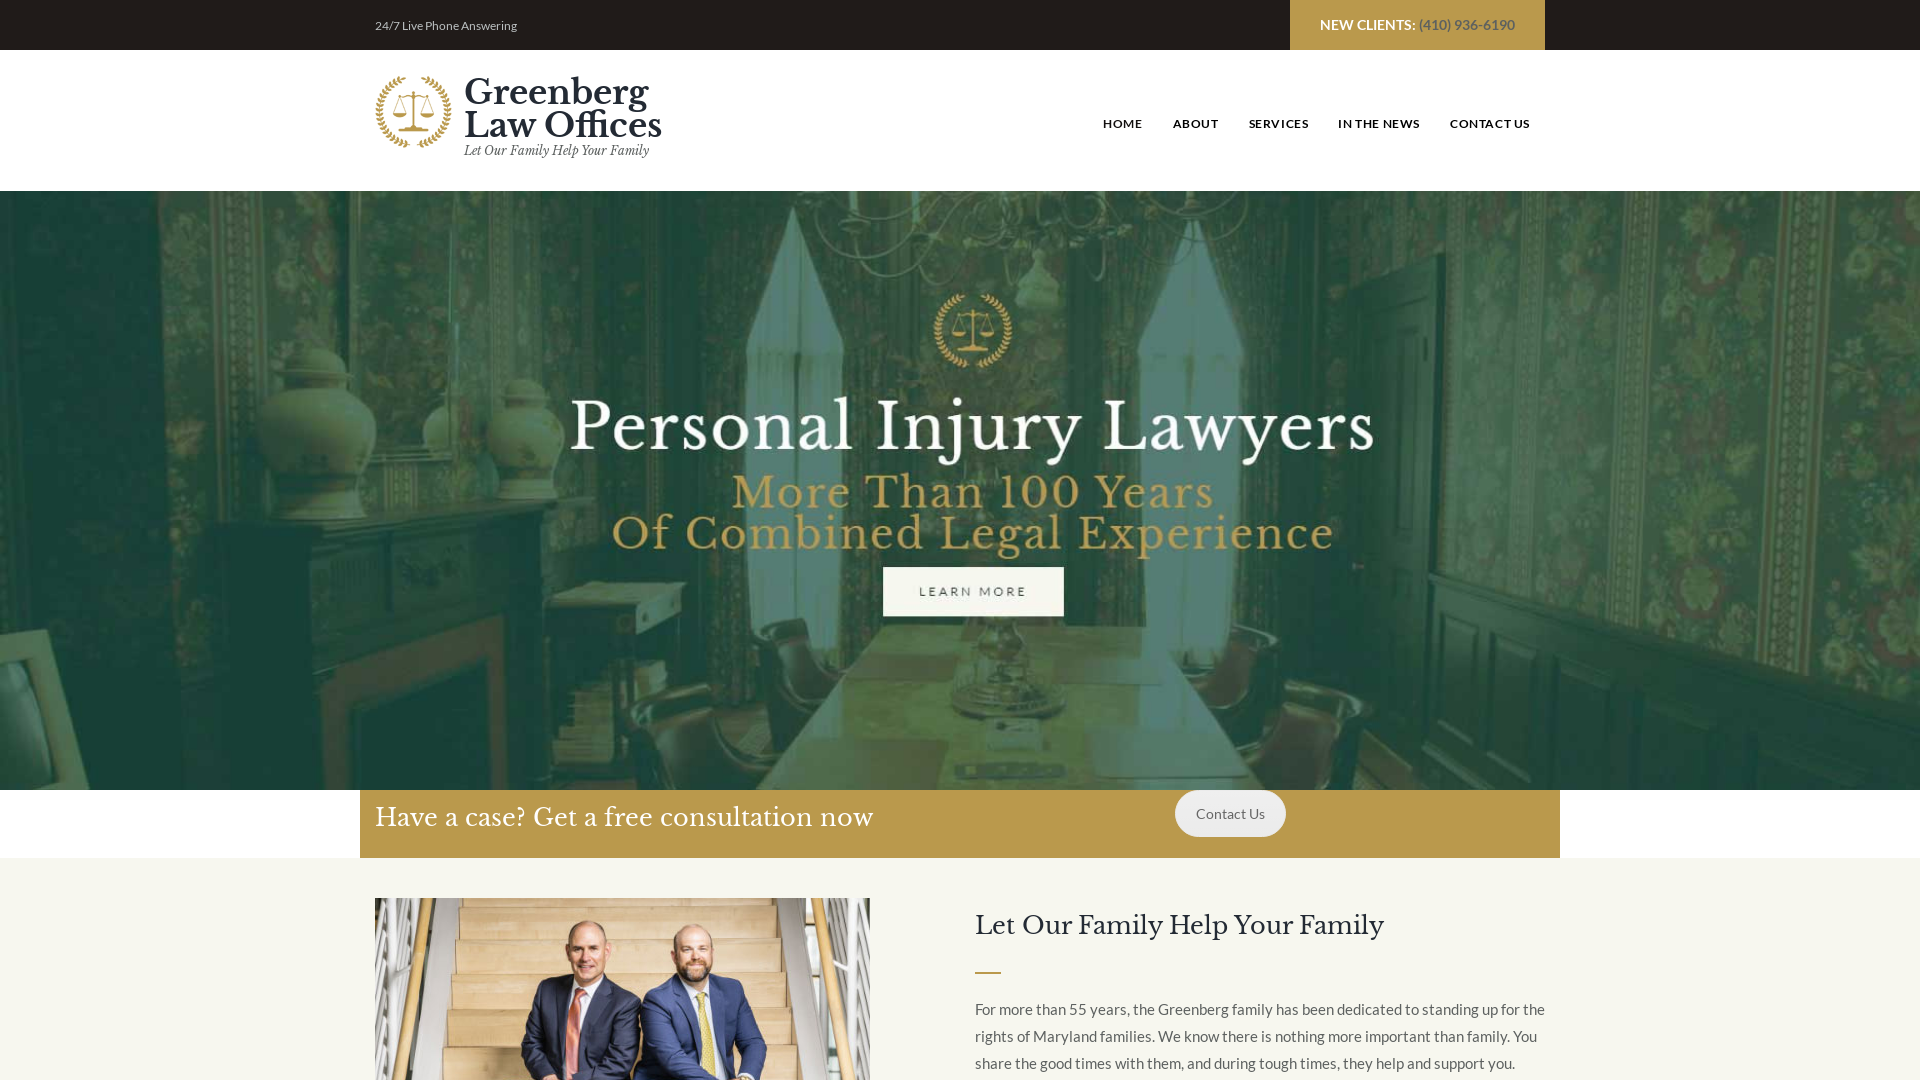 Greenberg Law Offices